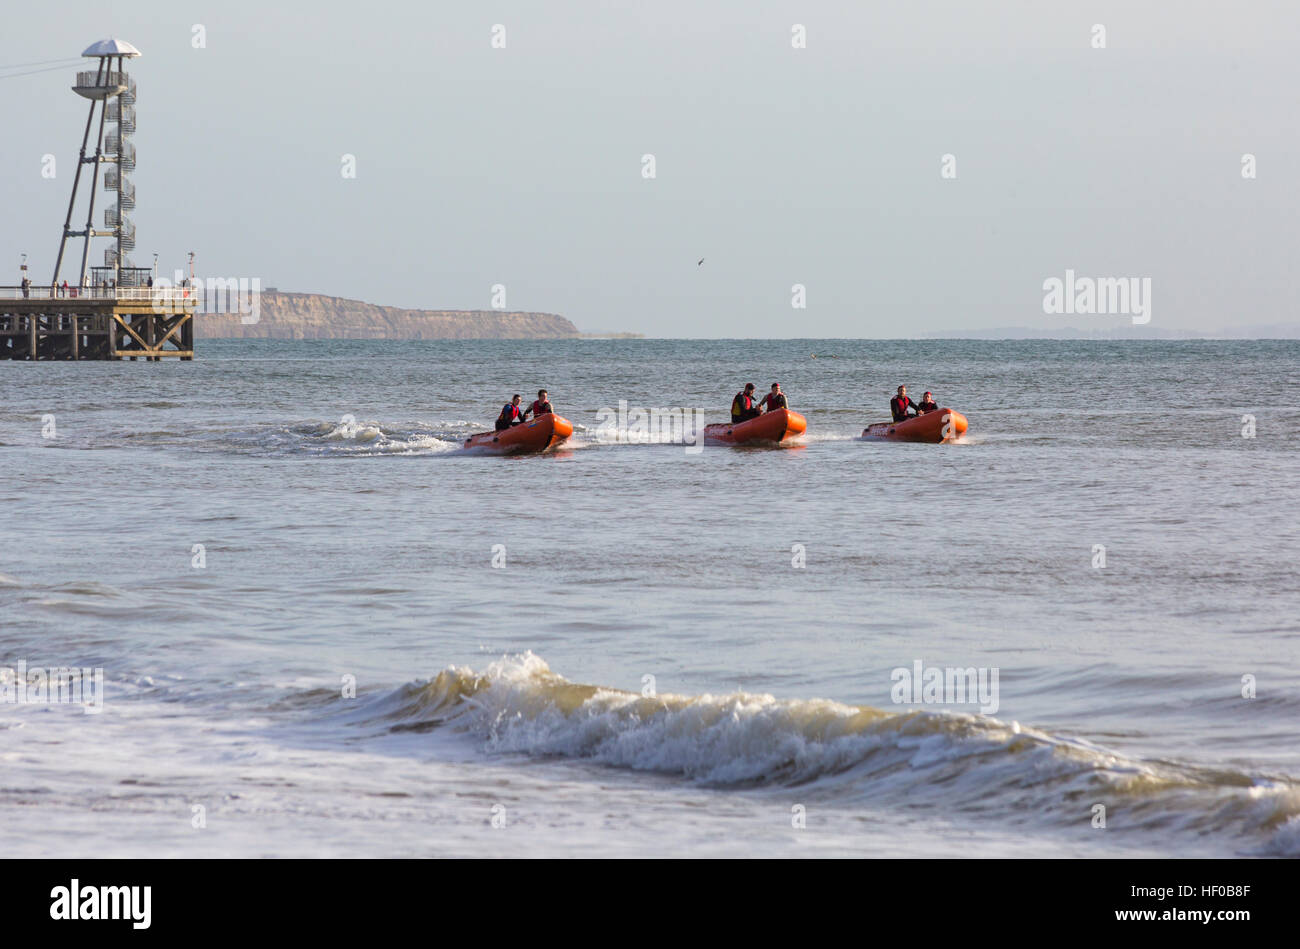 Durley Chine, Bournemouth, Dorset, UK. 26 December 2016. Bournemouth Lifeguard Corps give a demonstration of their lifesaving skills in the sea. The Corps, founded in 1965, is one of the largest and most successful volunteer lifeguard clubs in the UK with more than 100 members aged from 7 to 70. Credit: Carolyn Jenkins/Alamy Live News Stock Photo